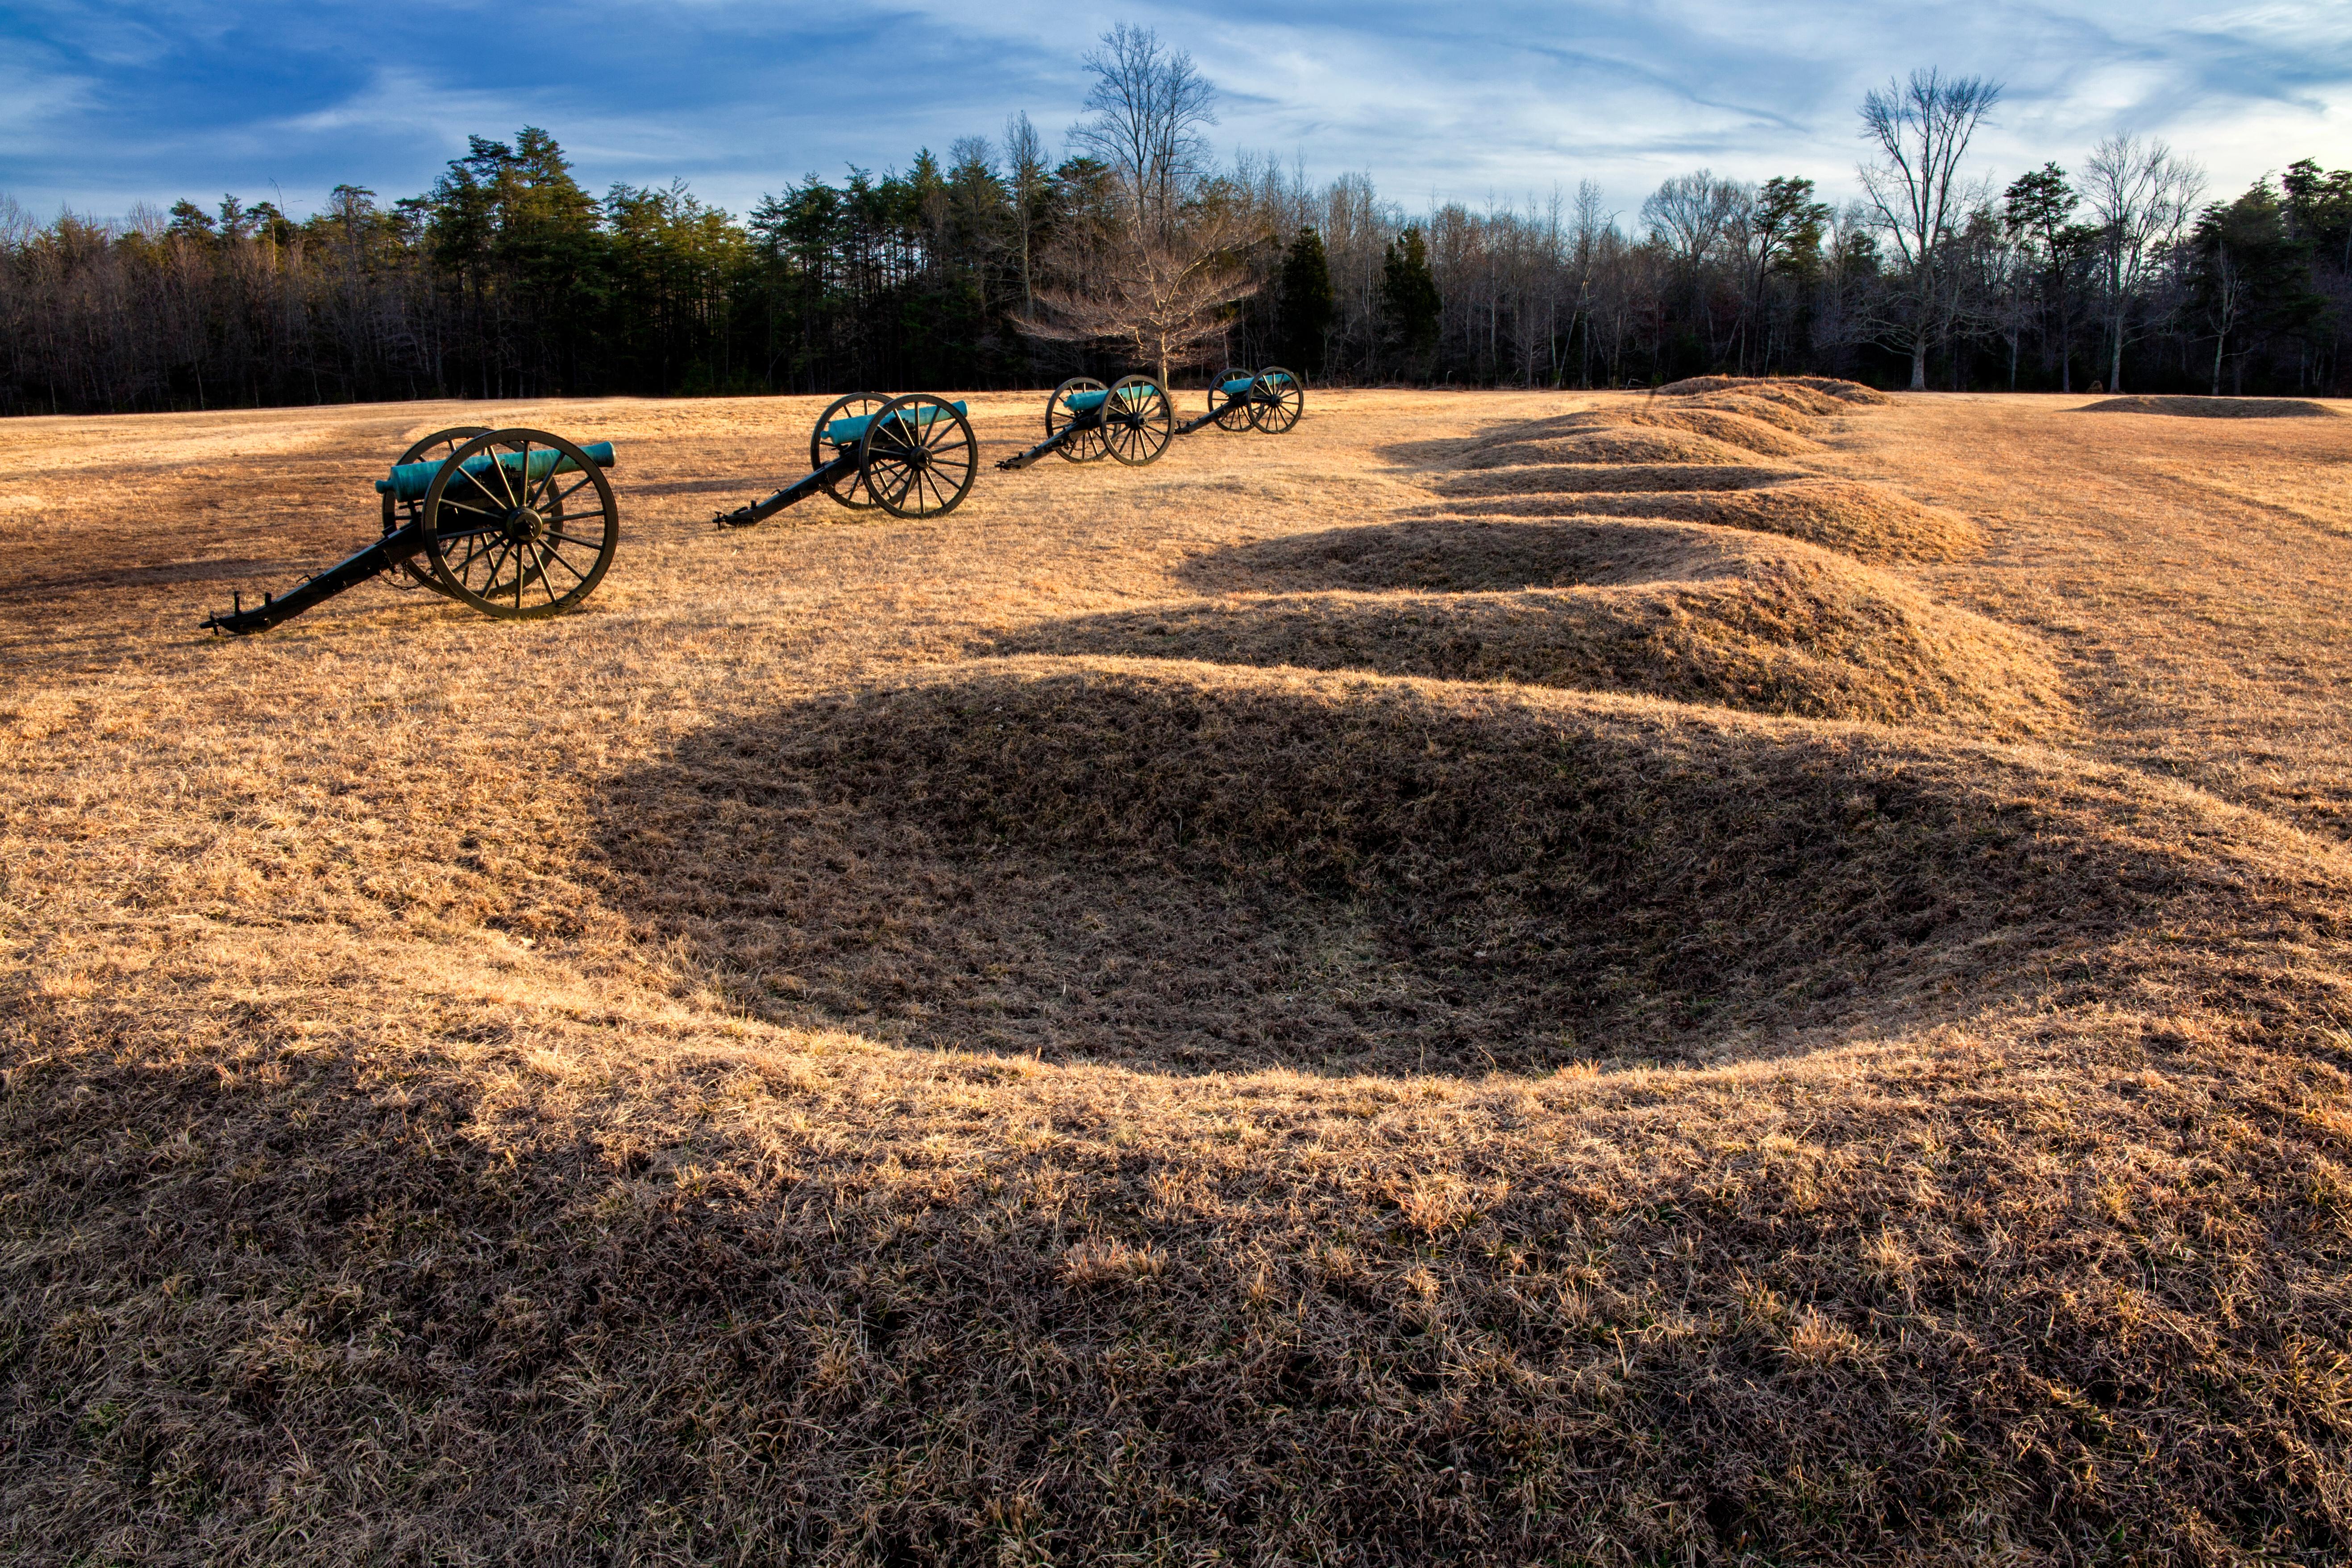 A line of four cannons placed in front of crescent shaped earthen gun pits.